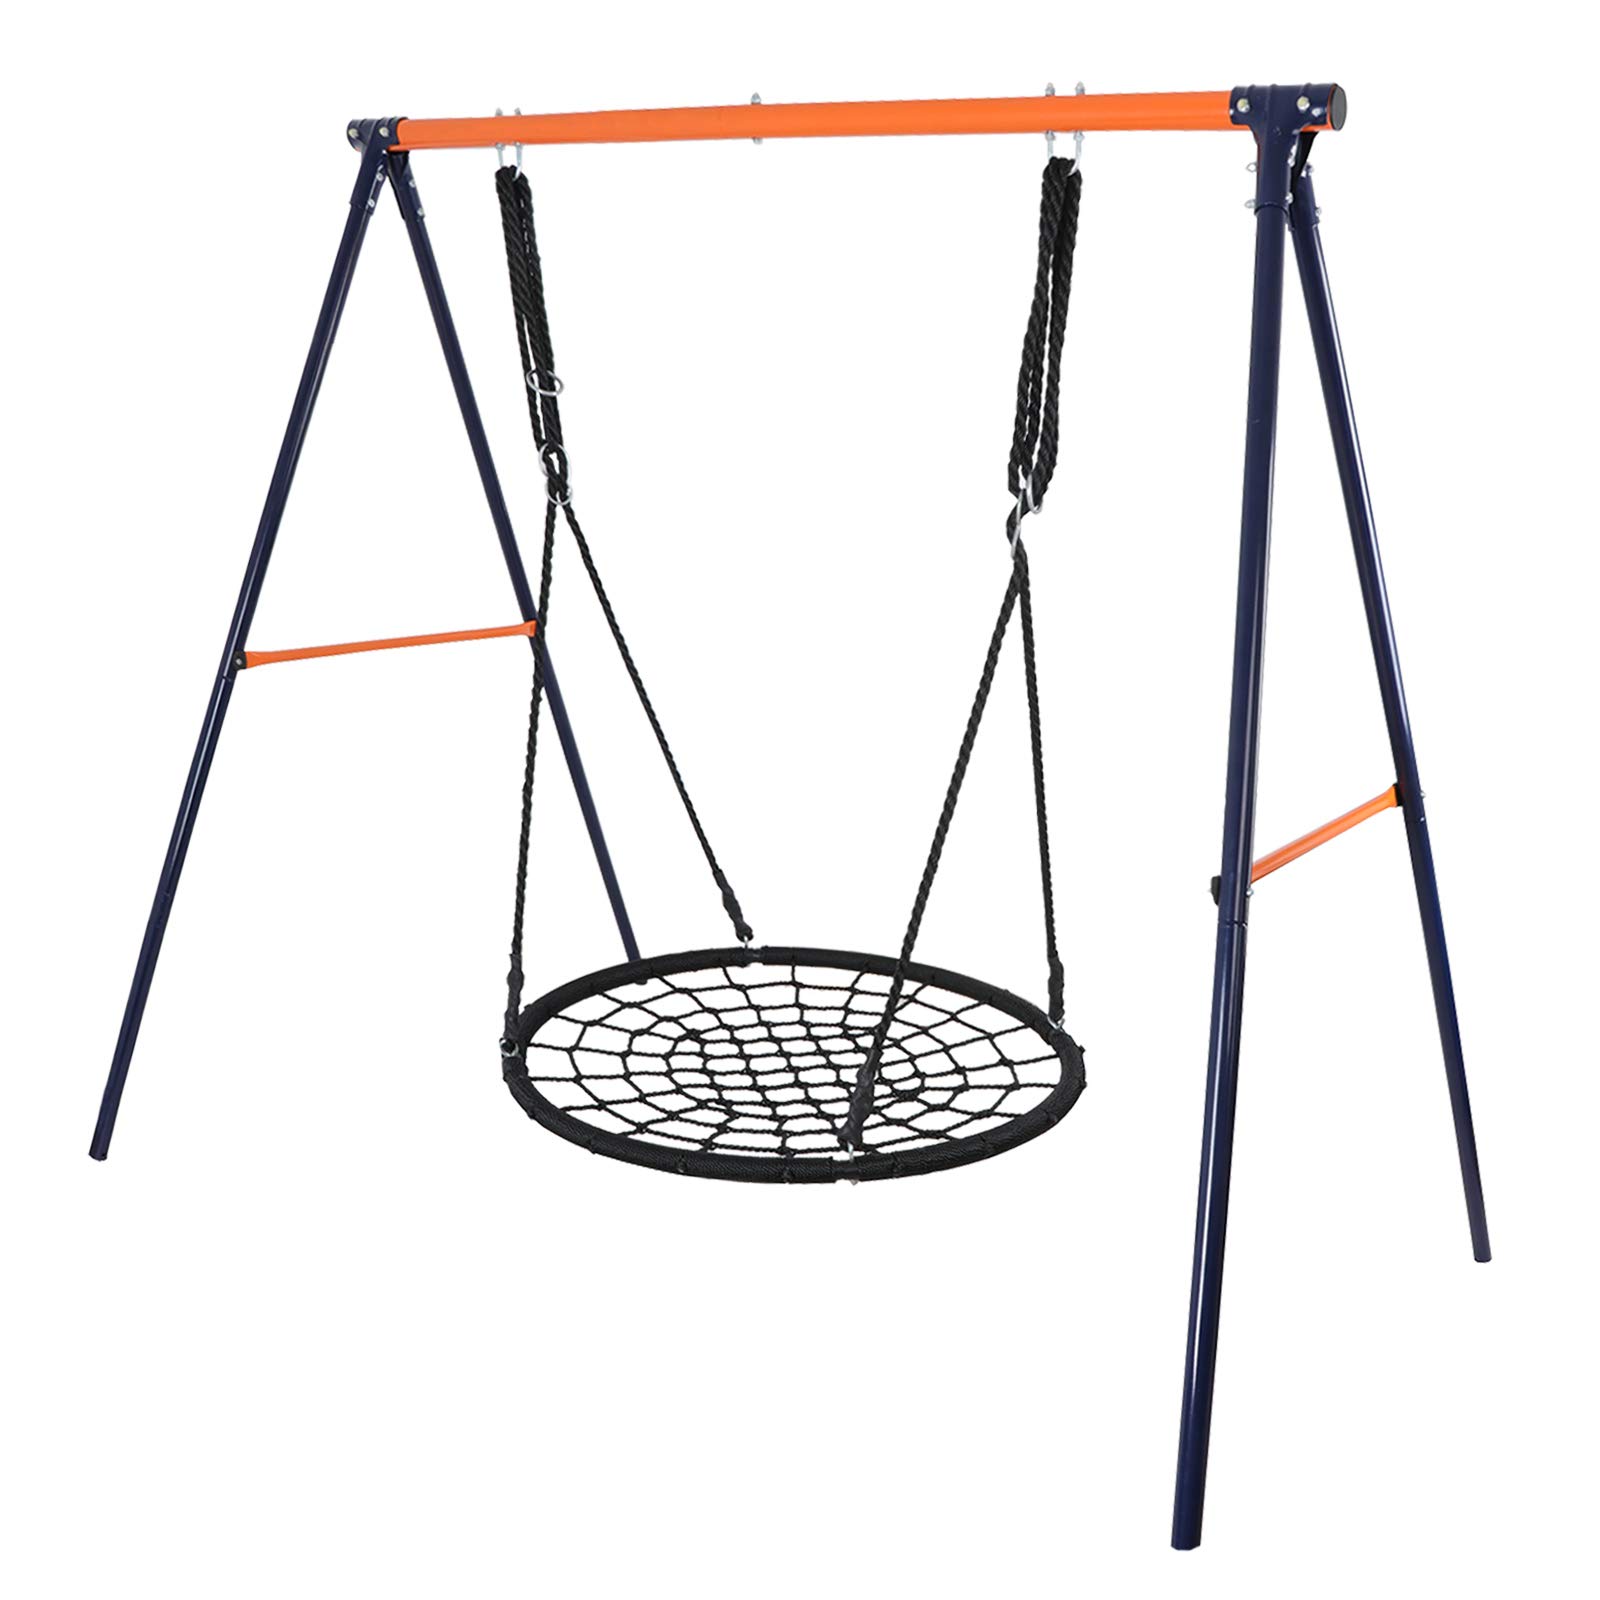 SUPER DEAL Swing Set combo for 1-2 Kids - 40AA Web Tree Swing + Heavy Duty A-Frame Metal Swing Set, Resilient and Resistant to A